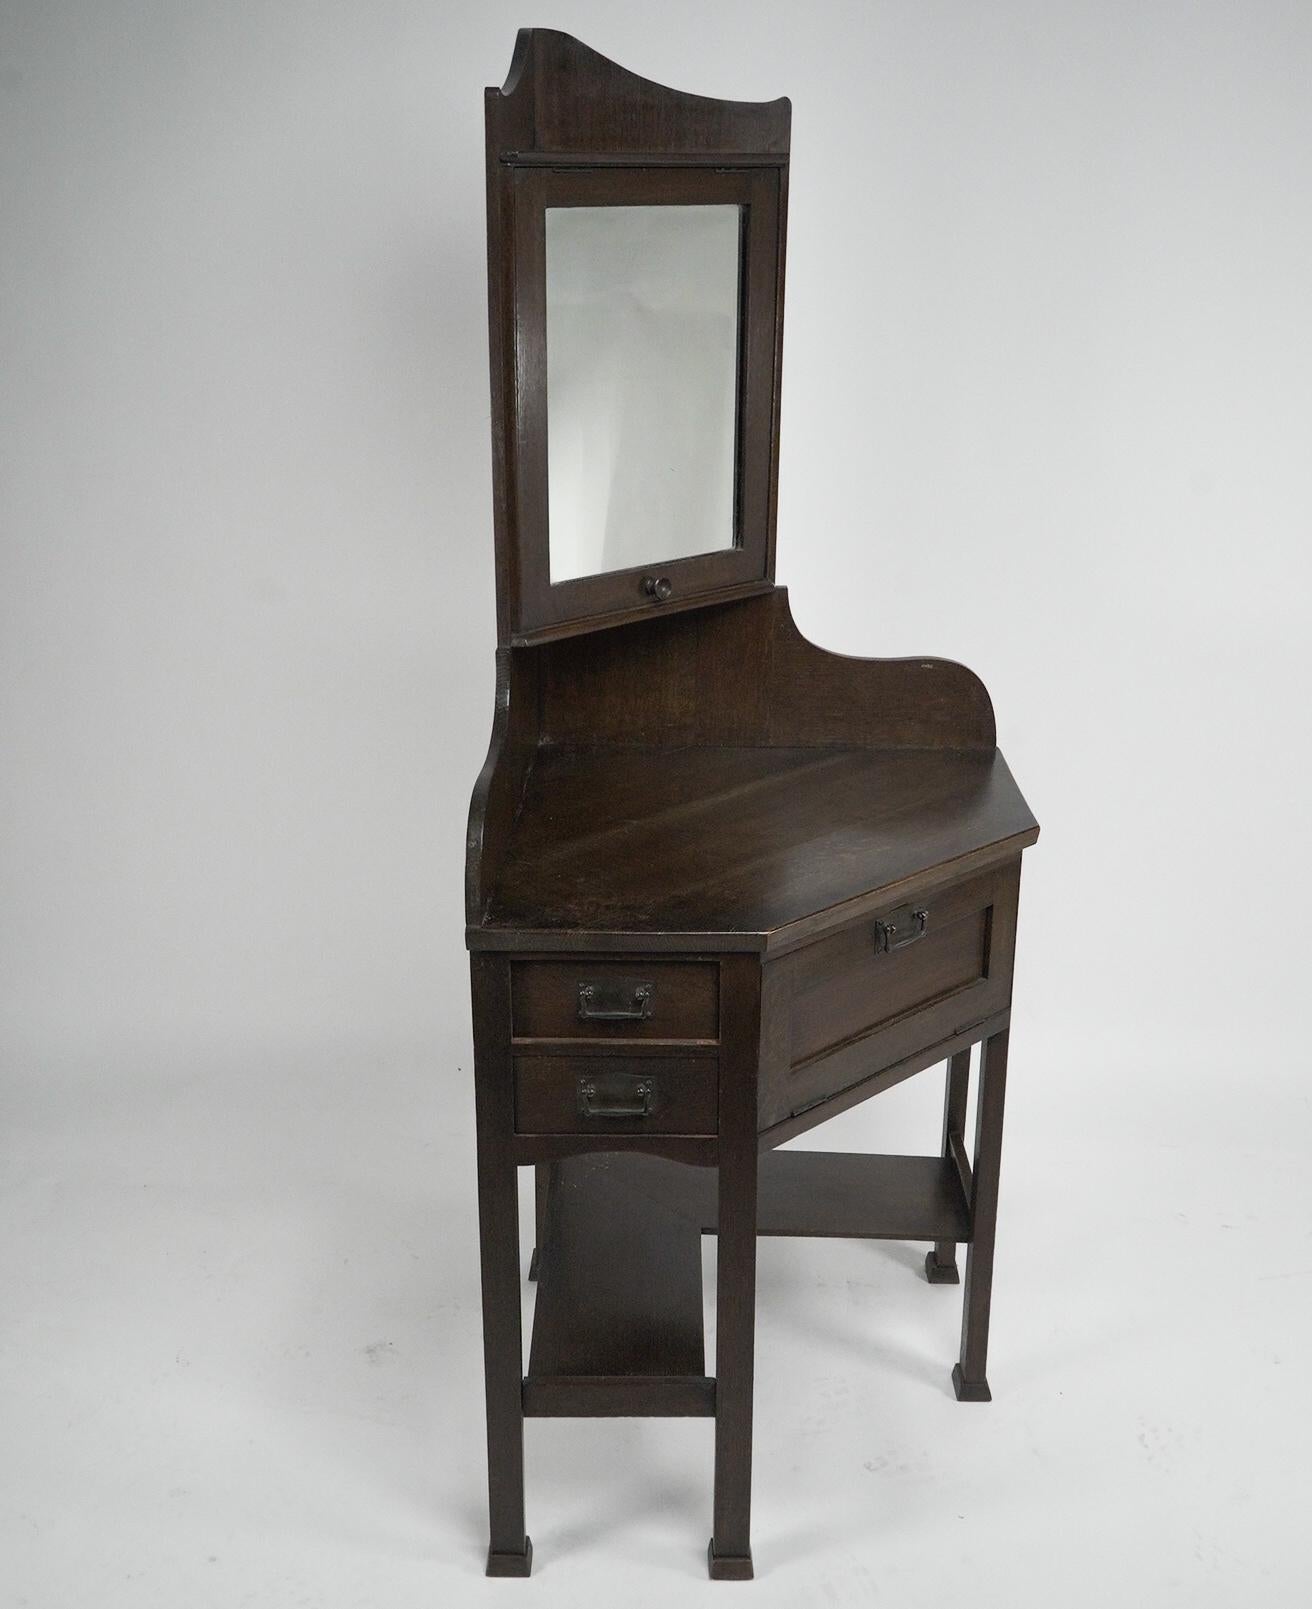 English Liberty and Co. A rare and unusual Arts and Crafts oak corner dressing table For Sale